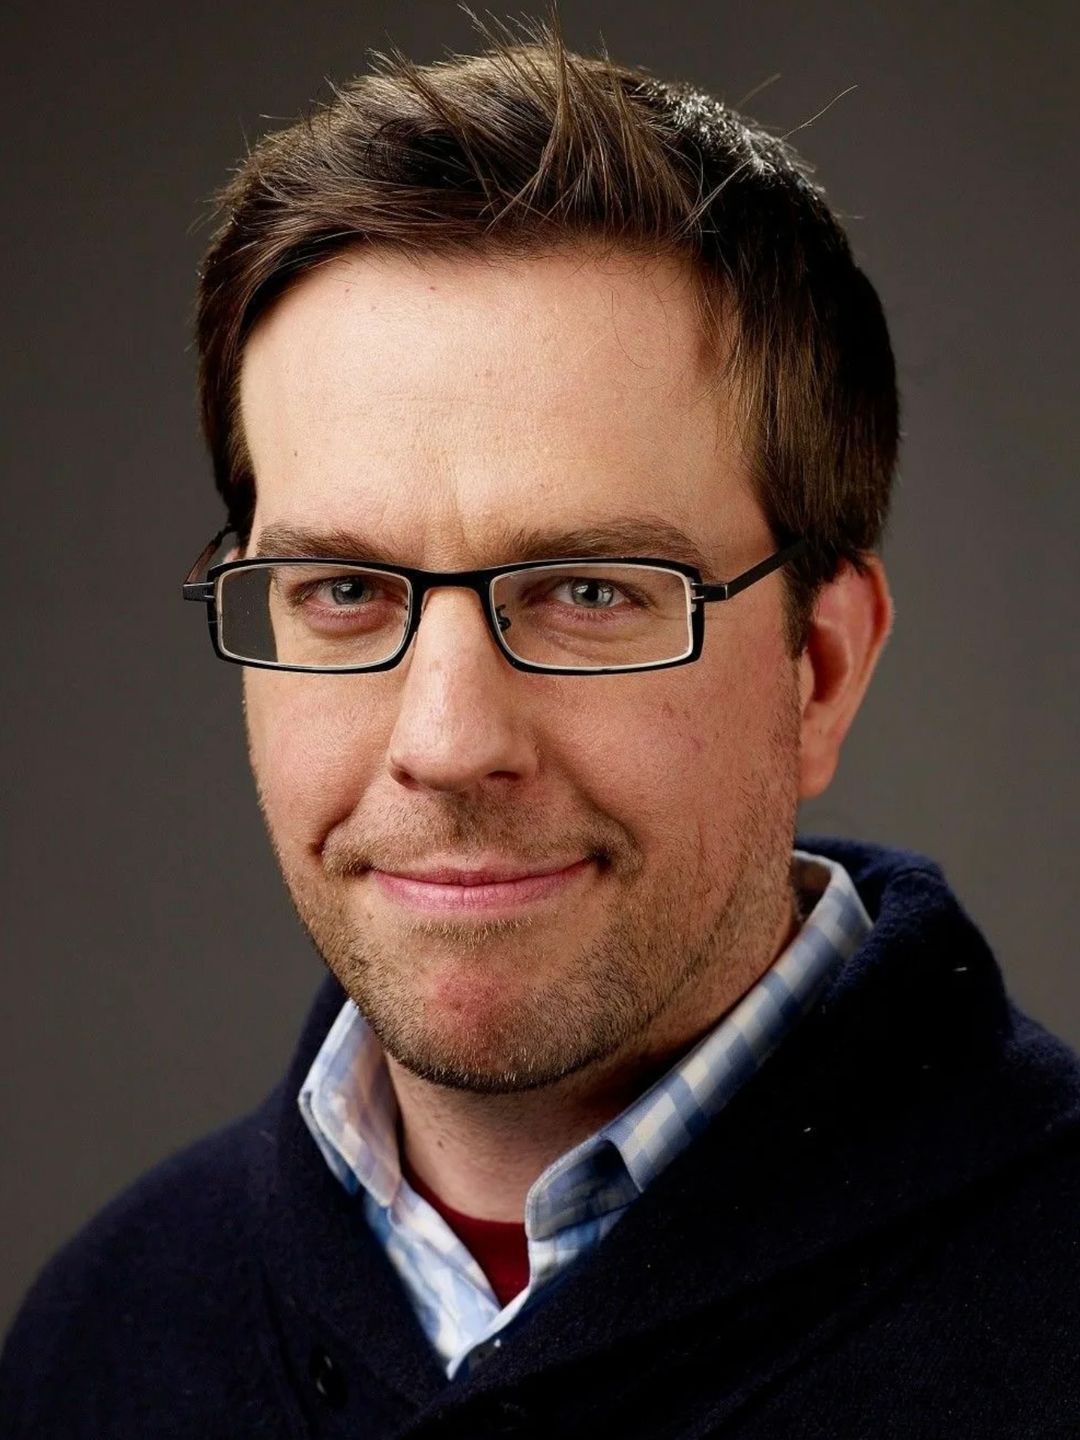 Ed Helms current look